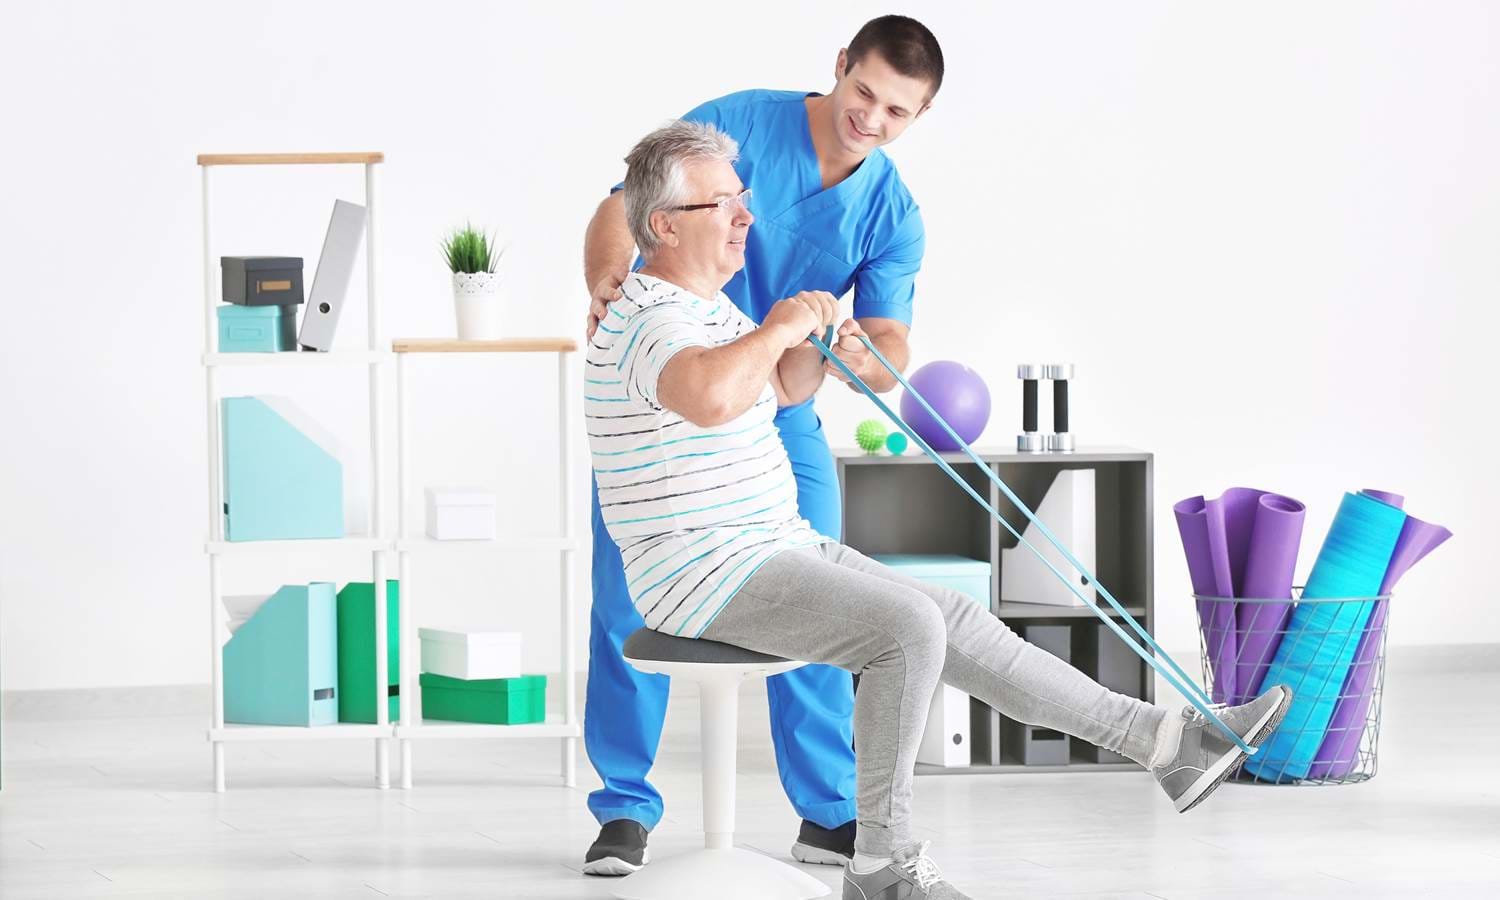 World Physiotherapy Day 2020: Importance and theme of physiotherapy